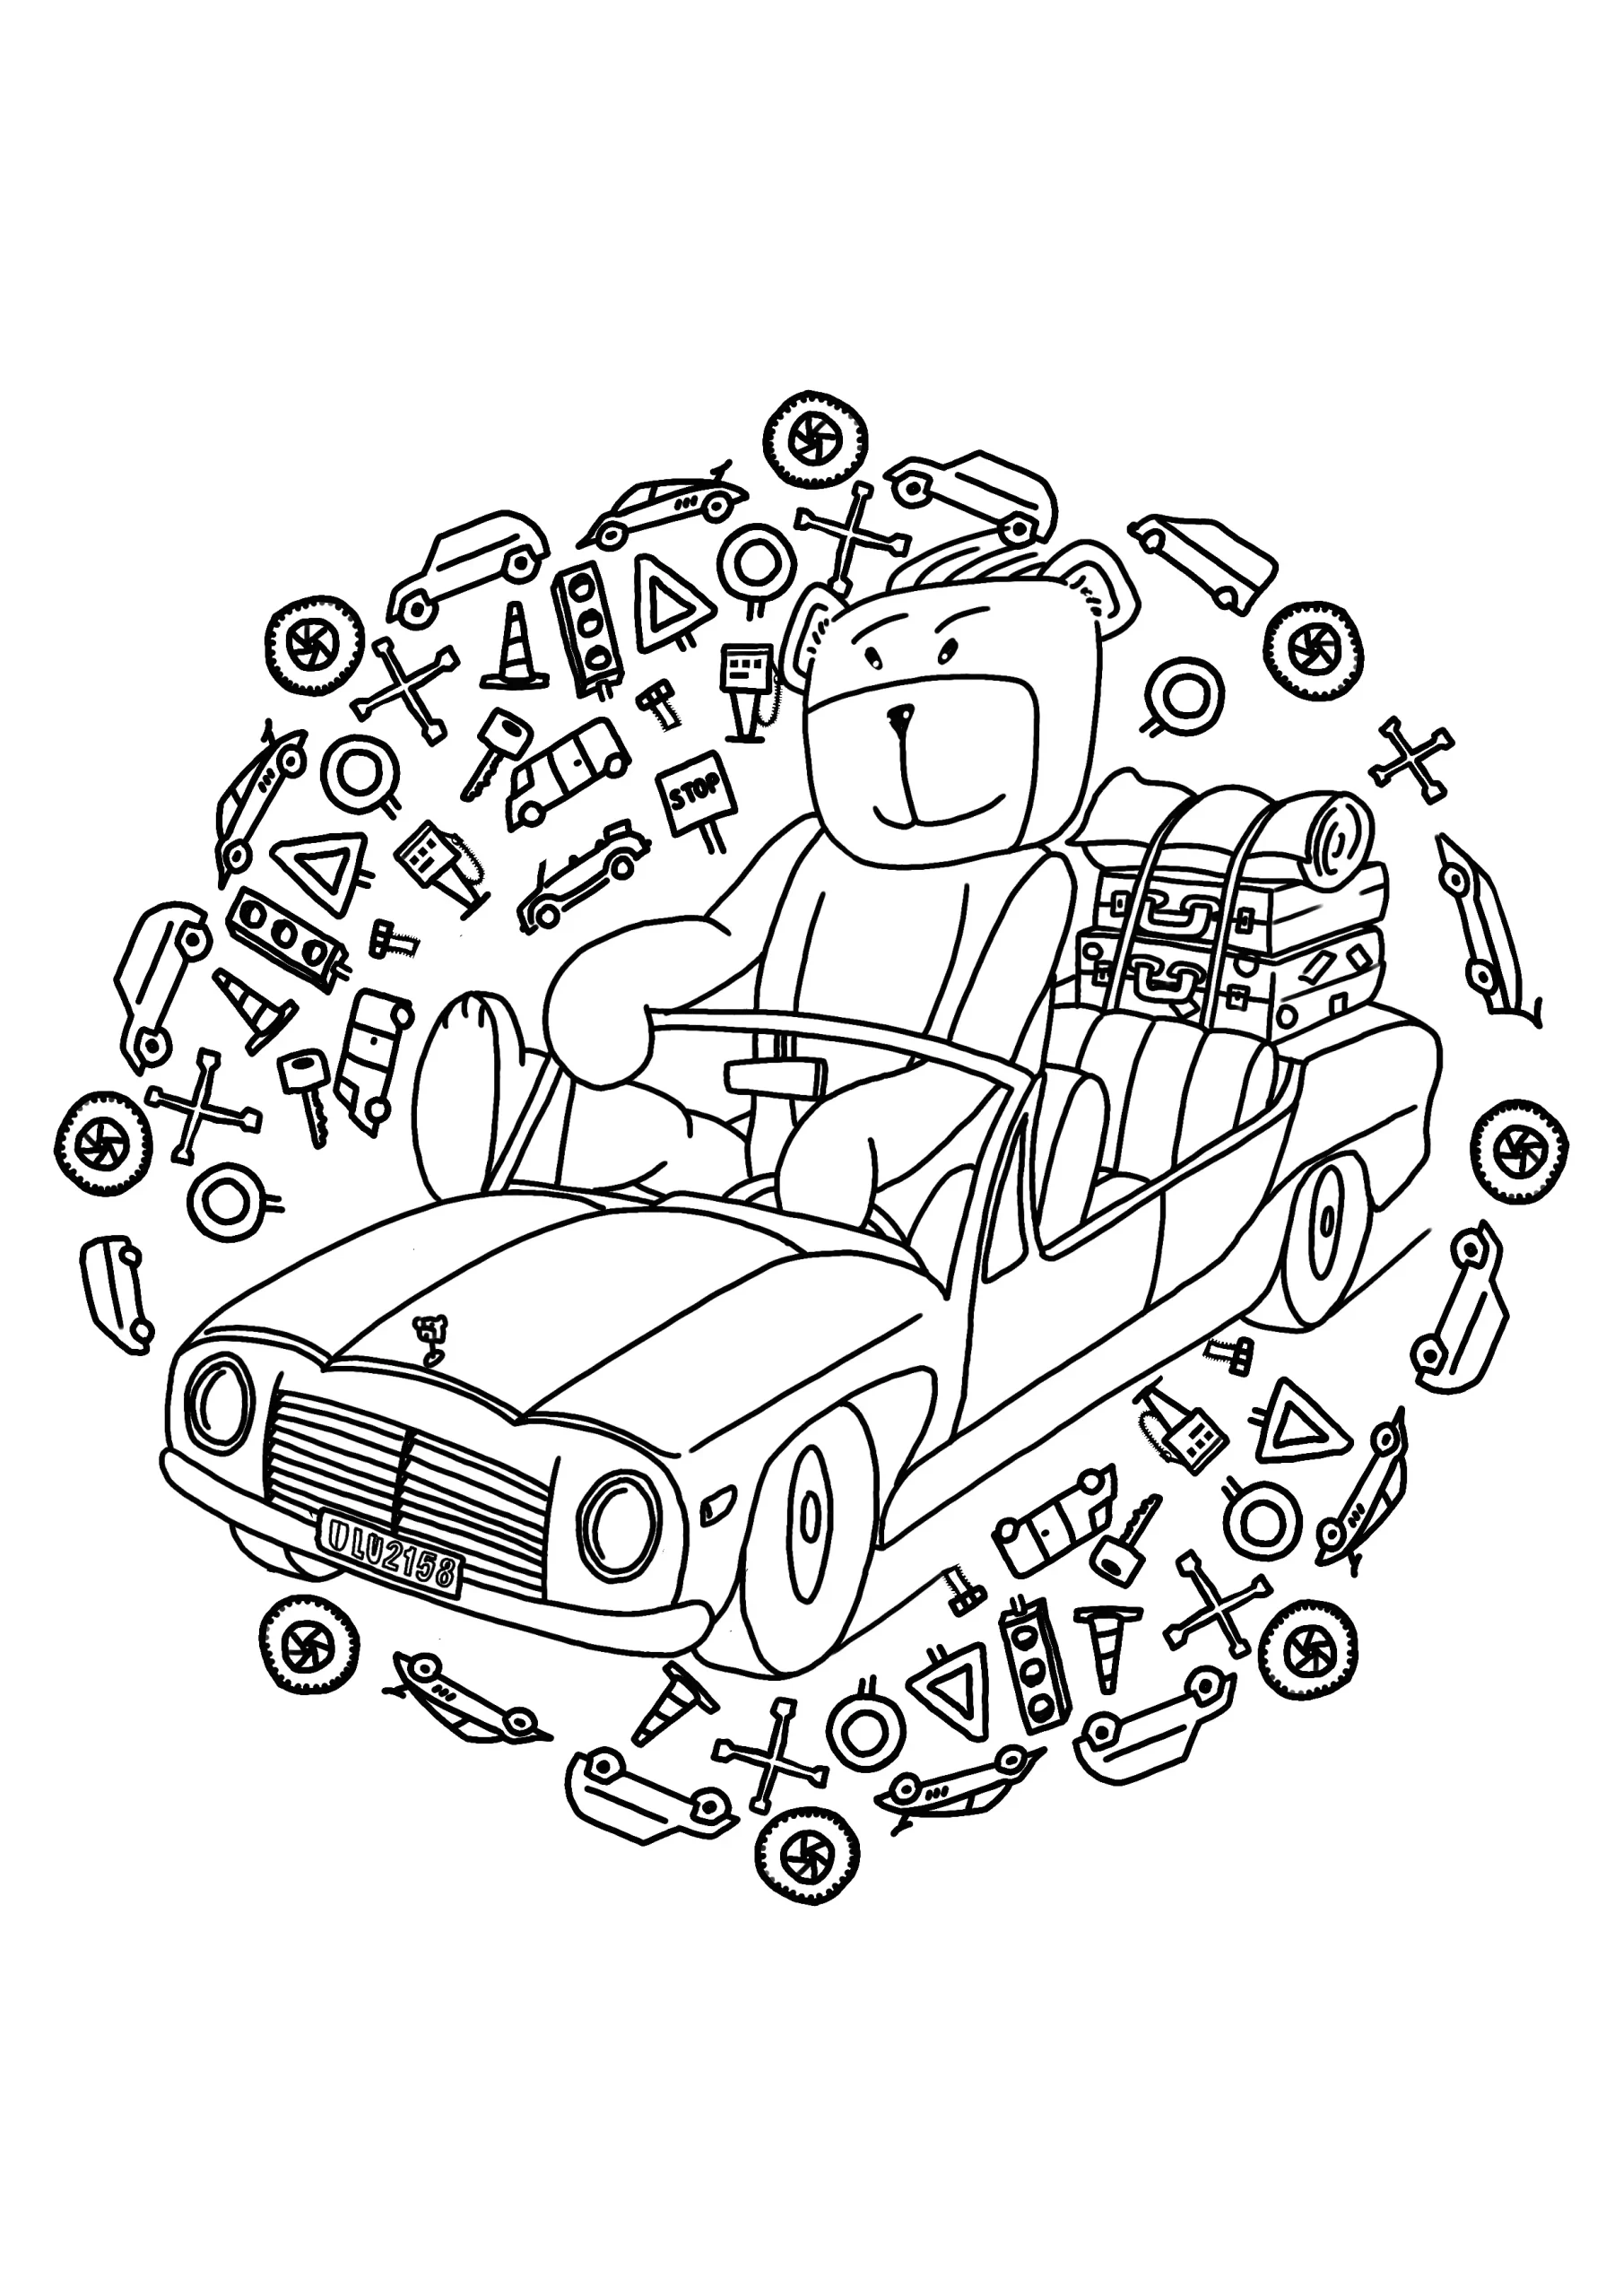 Coloring Page with Car